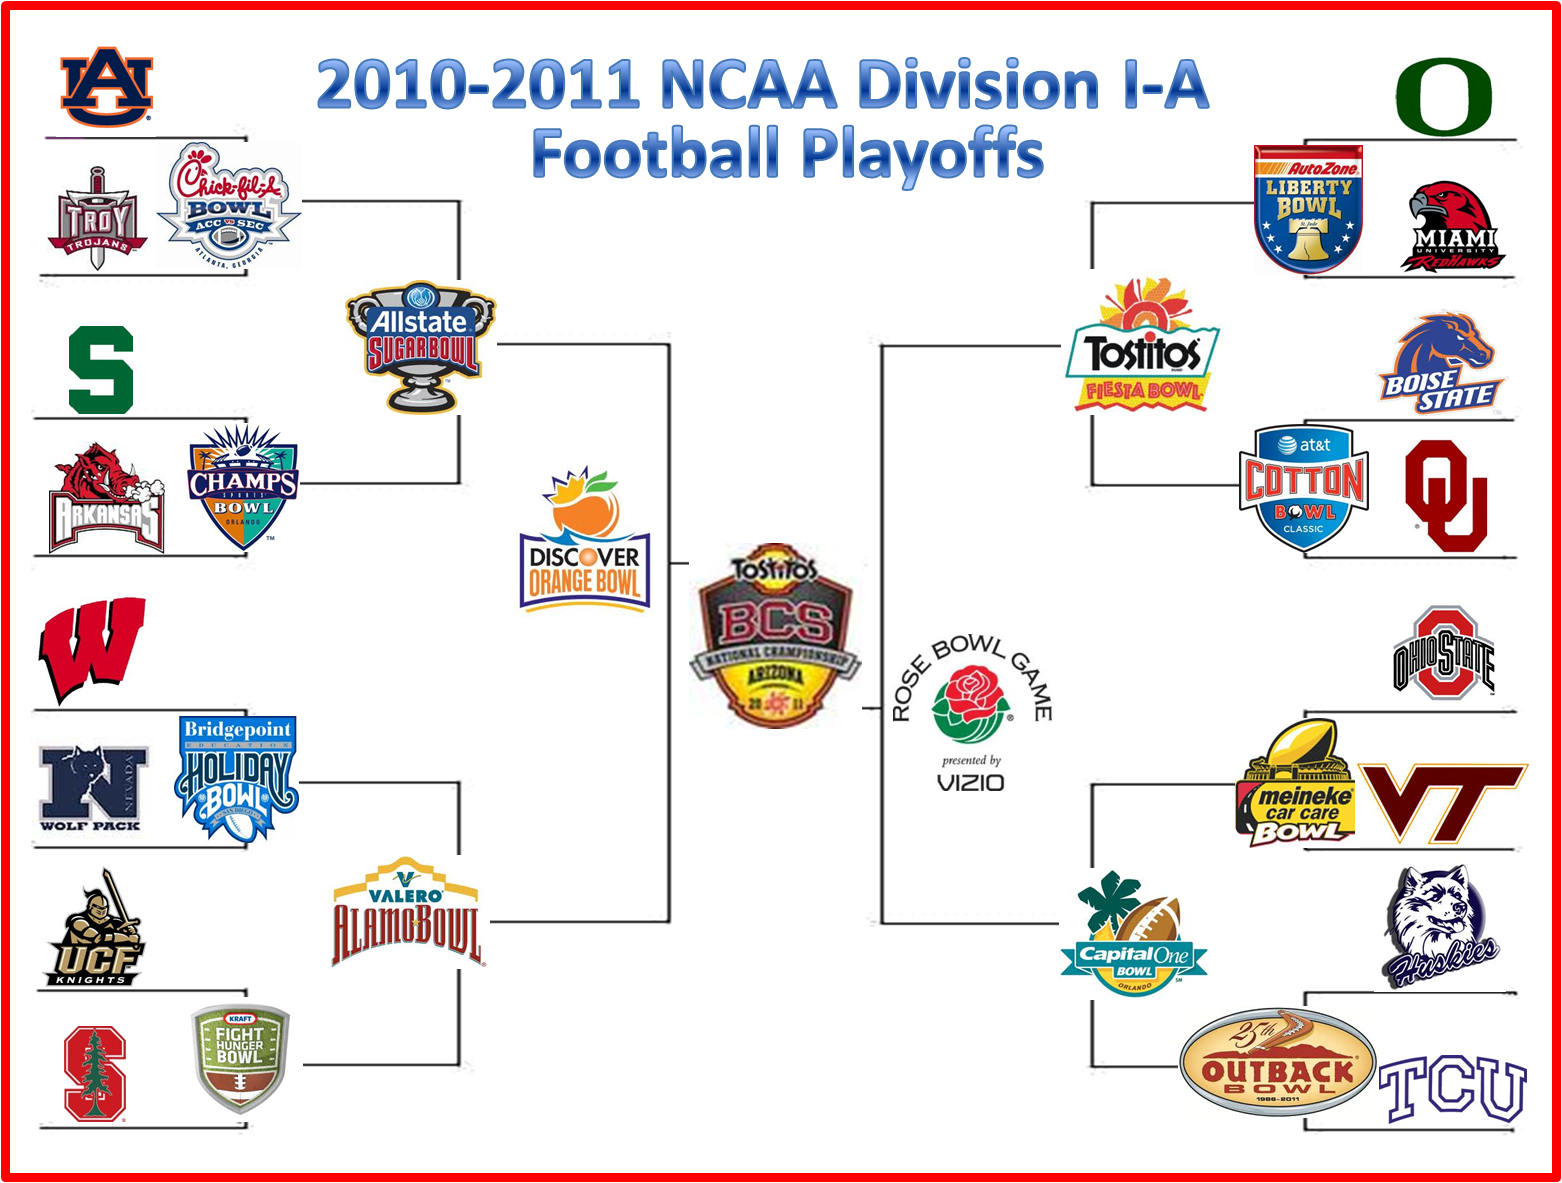 Punting On Third 20102011 NCAA Division IA Football Playoff Bracket